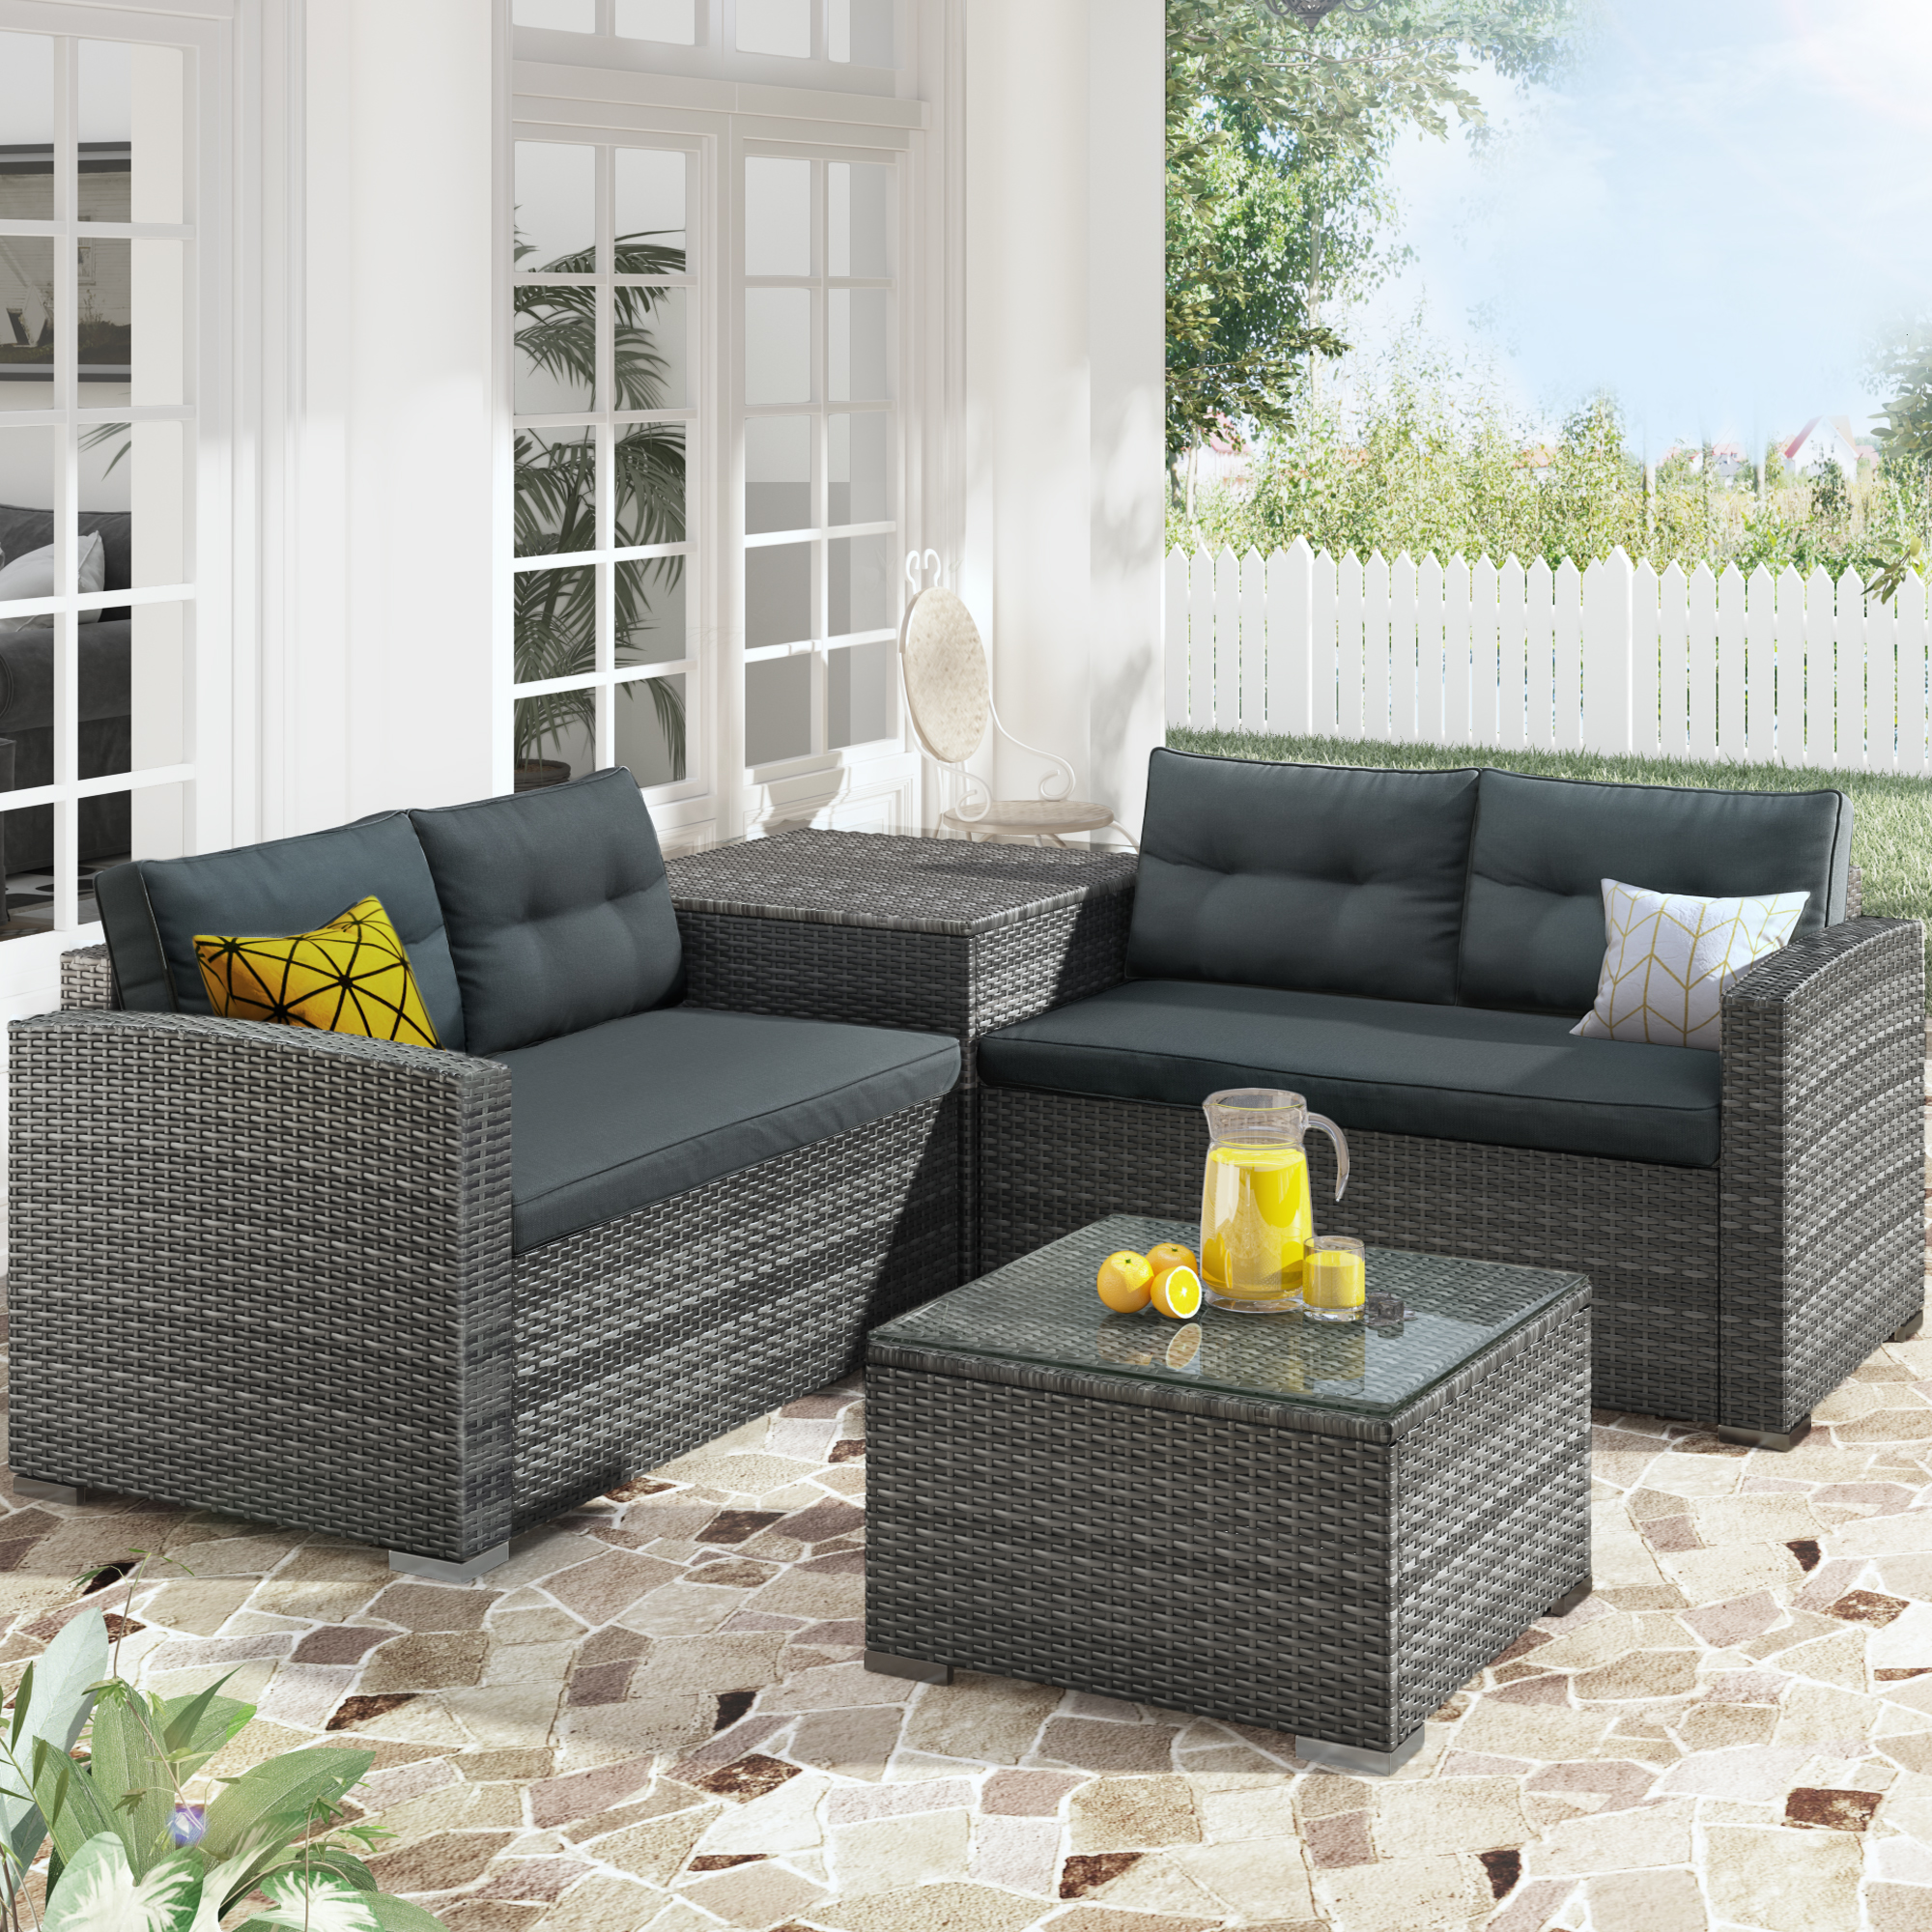 Outdoor Furniture Sofa Set With Large Storage Box - WY000172EAA